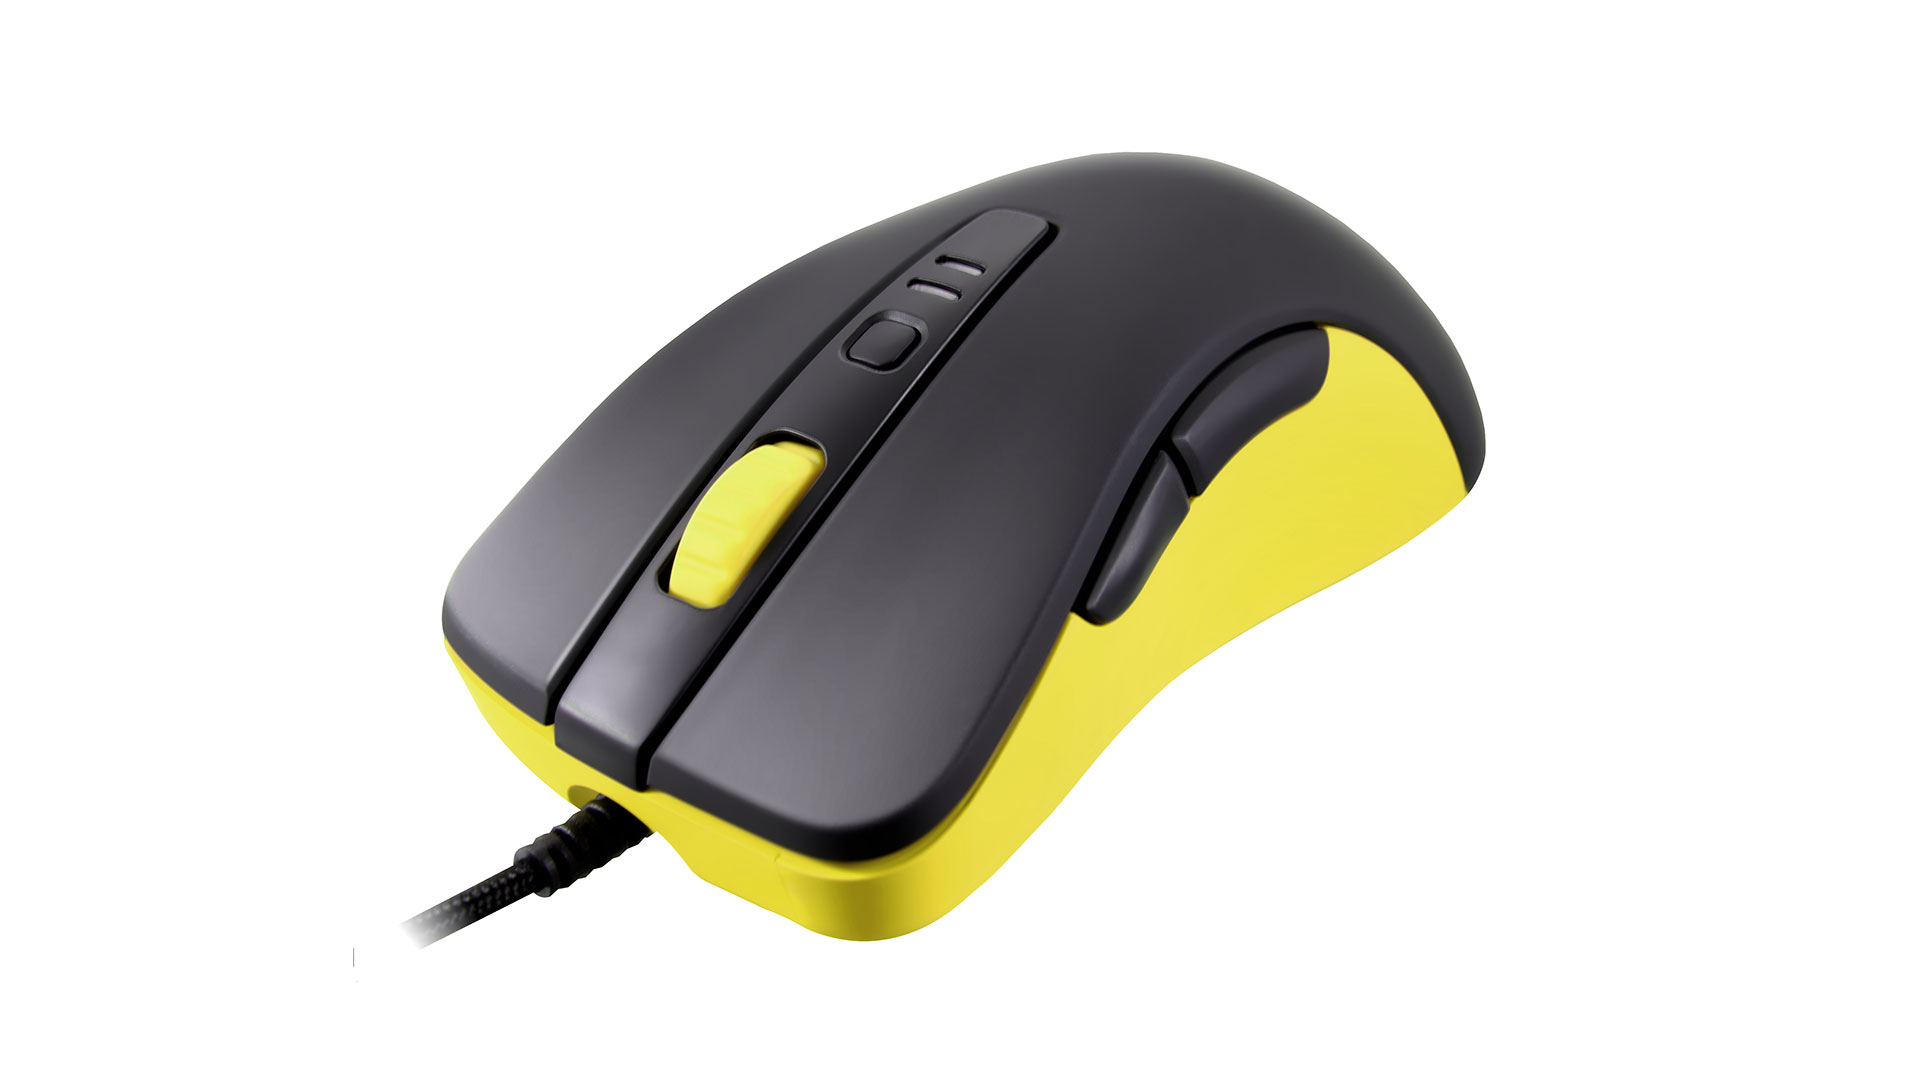 cougar-300m-gaming-mouse-reveal-02